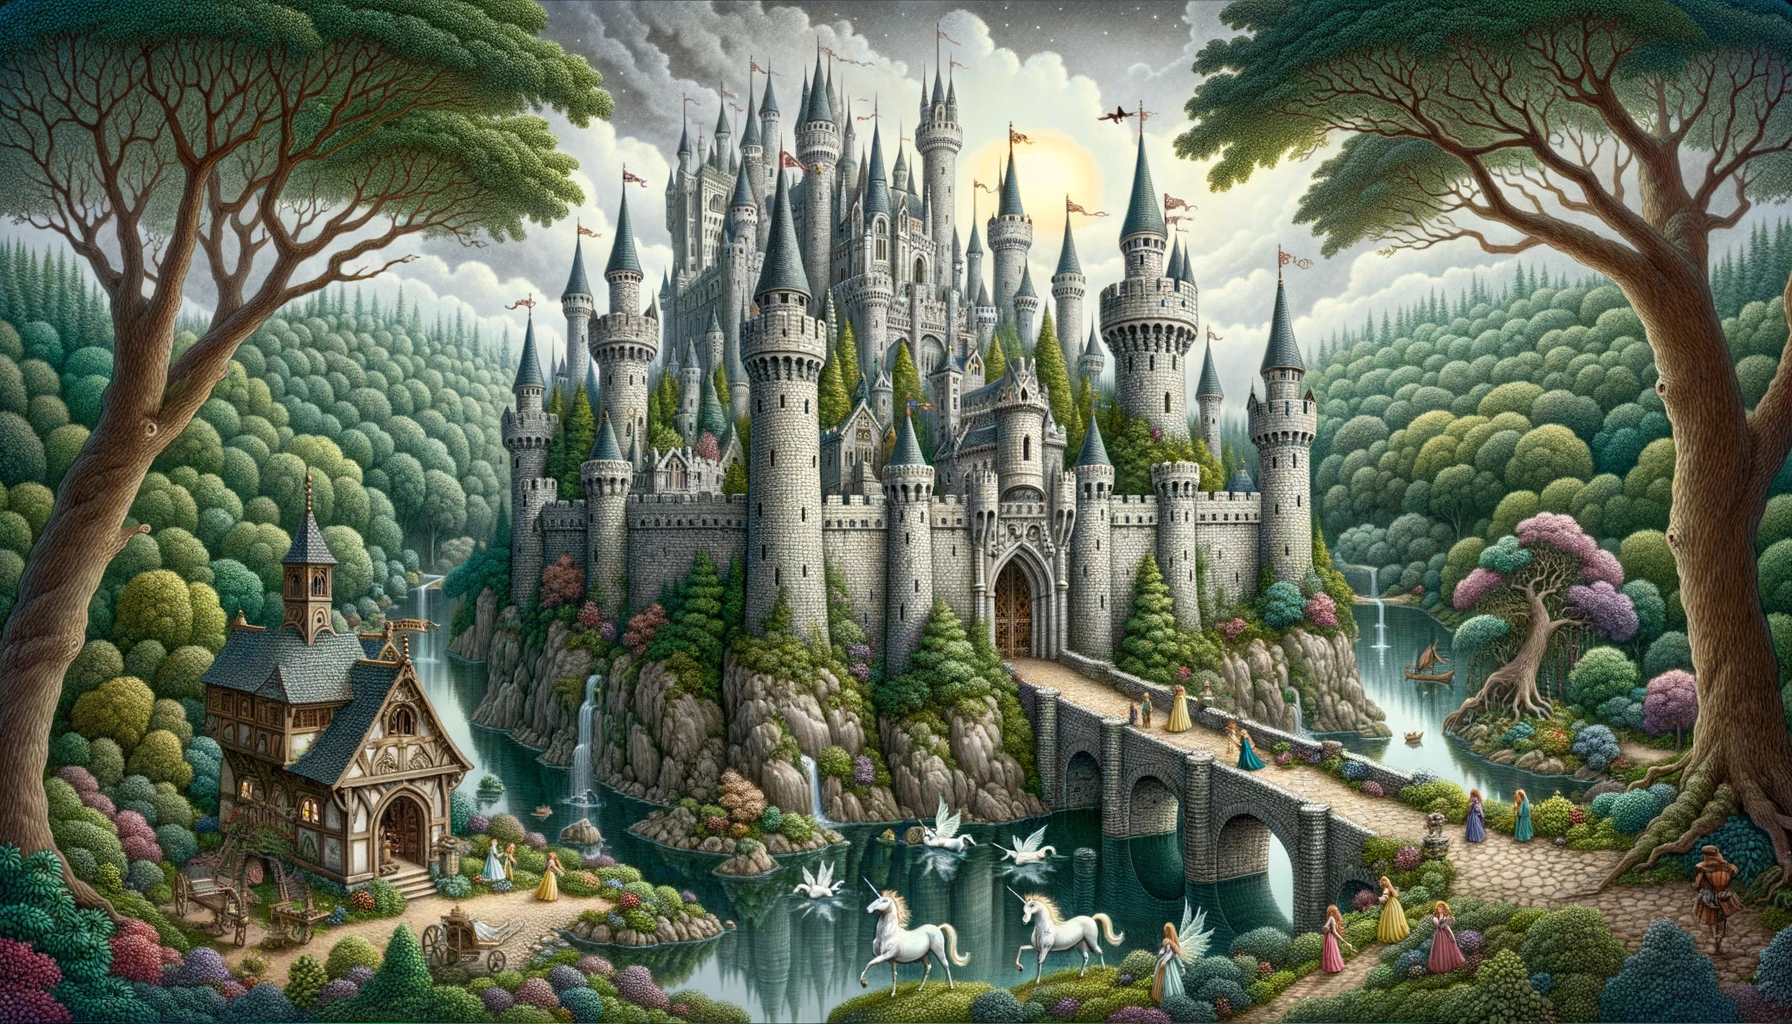 Illustration of a scene from a fairy tale. Dominating the landscape is a majestic castle, its walls built from gray stones and its towers adorned with flags. The castle is set on an elevated terrain, and surrounding it is an enchanted forest, where every tree and shrub seems to whisper secrets. Hidden in the foliage, unicorns graze peacefully, and fairies flit about, their glow lighting up the surroundings. A moat, its waters reflecting the castle, acts as a barrier, and a stone bridge, with intricate carvings, connects the outer world to the castle entrance.